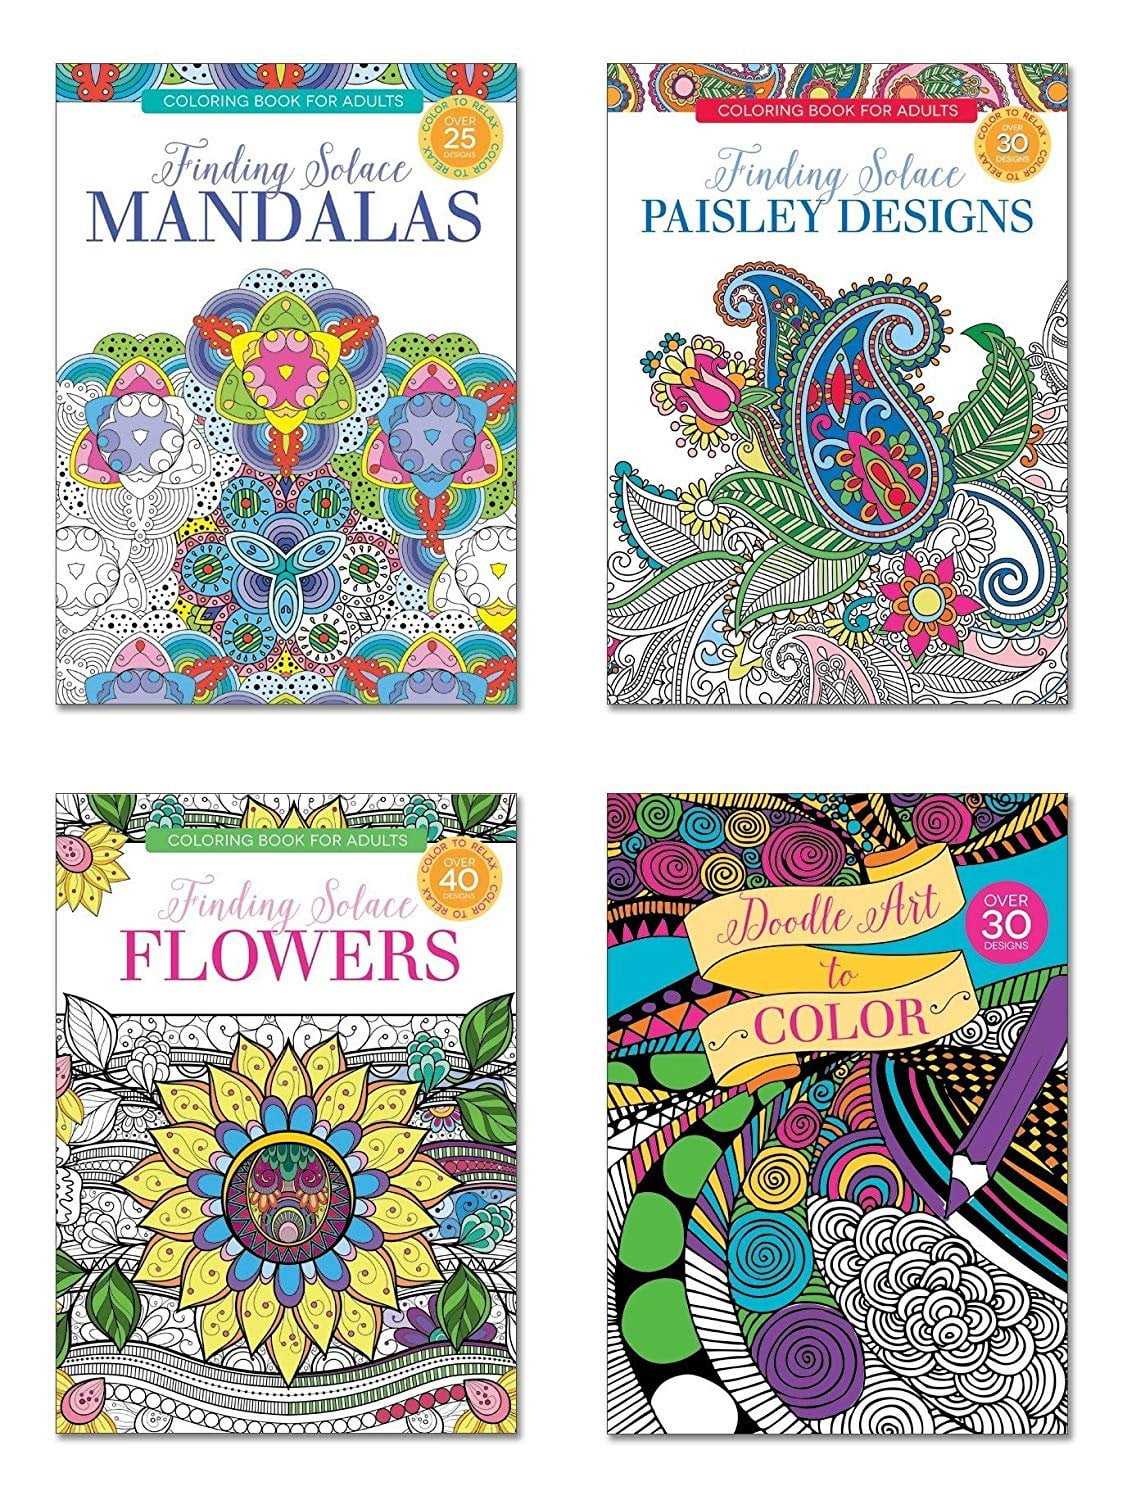 B-THERE Adult Coloring Books, Over 125 Different Designs Combined